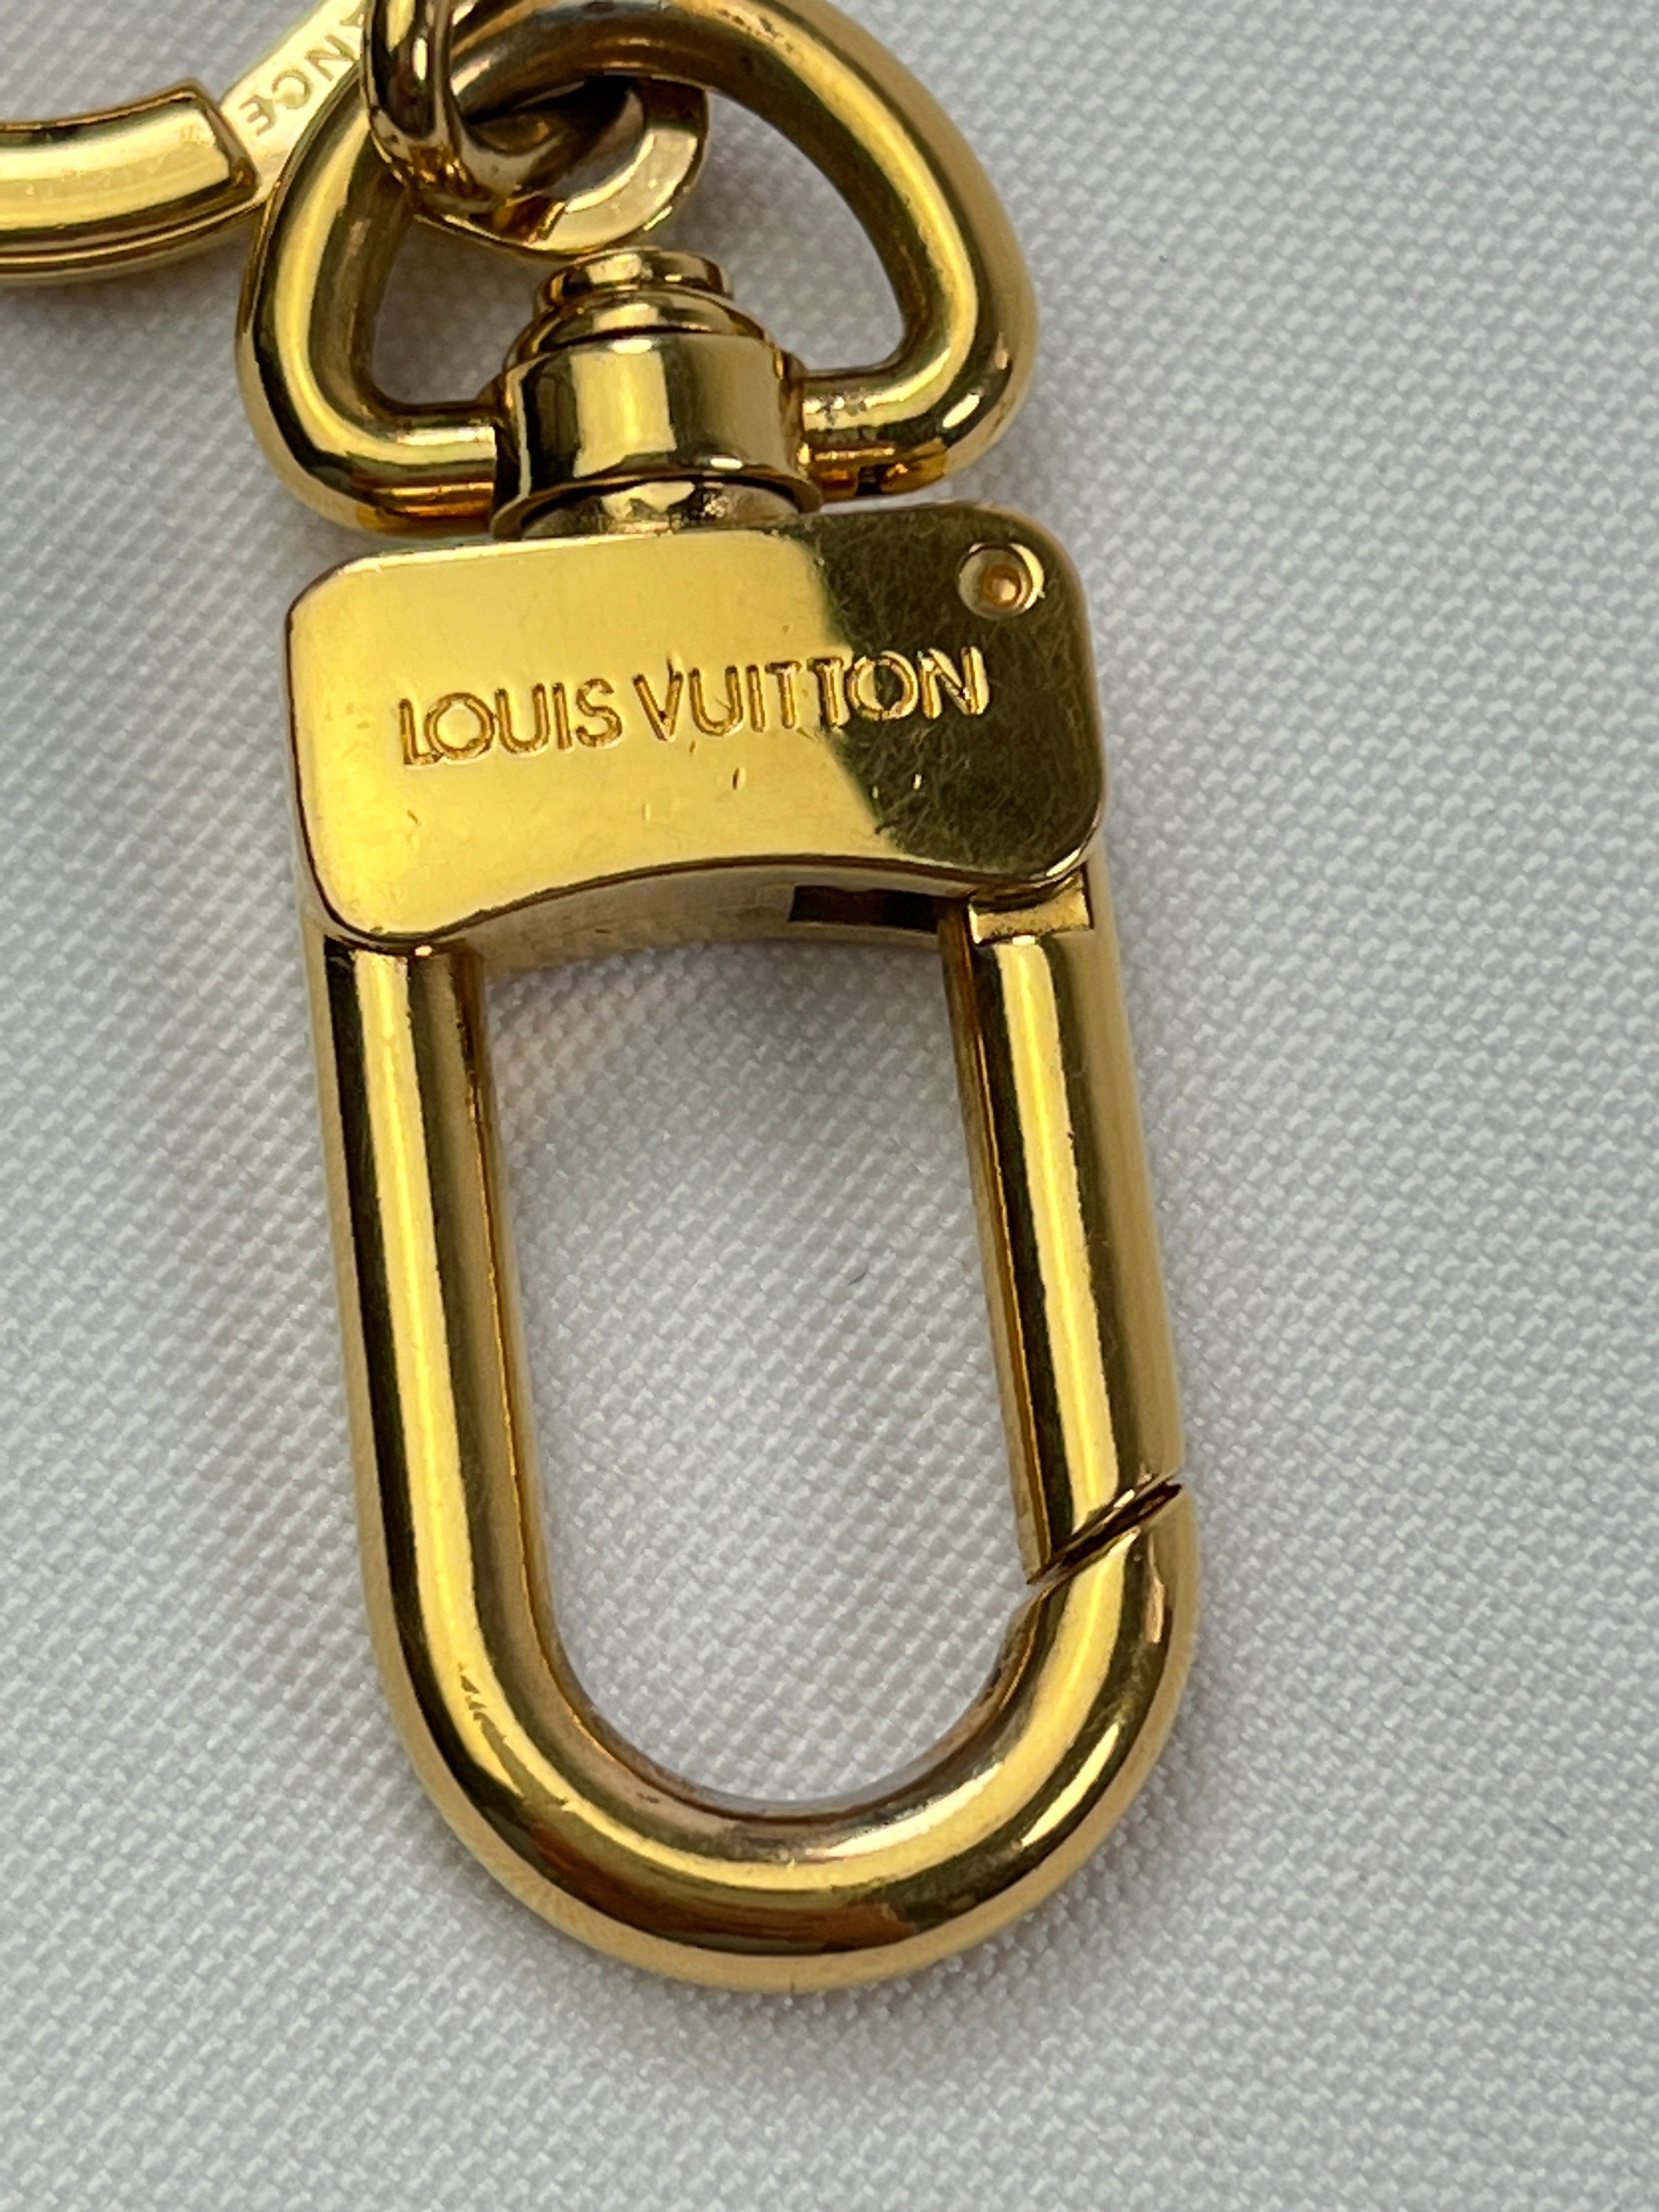 LOUIS VUITTON Goldtone Bolt Key Hold And Bag Extender - The Purse